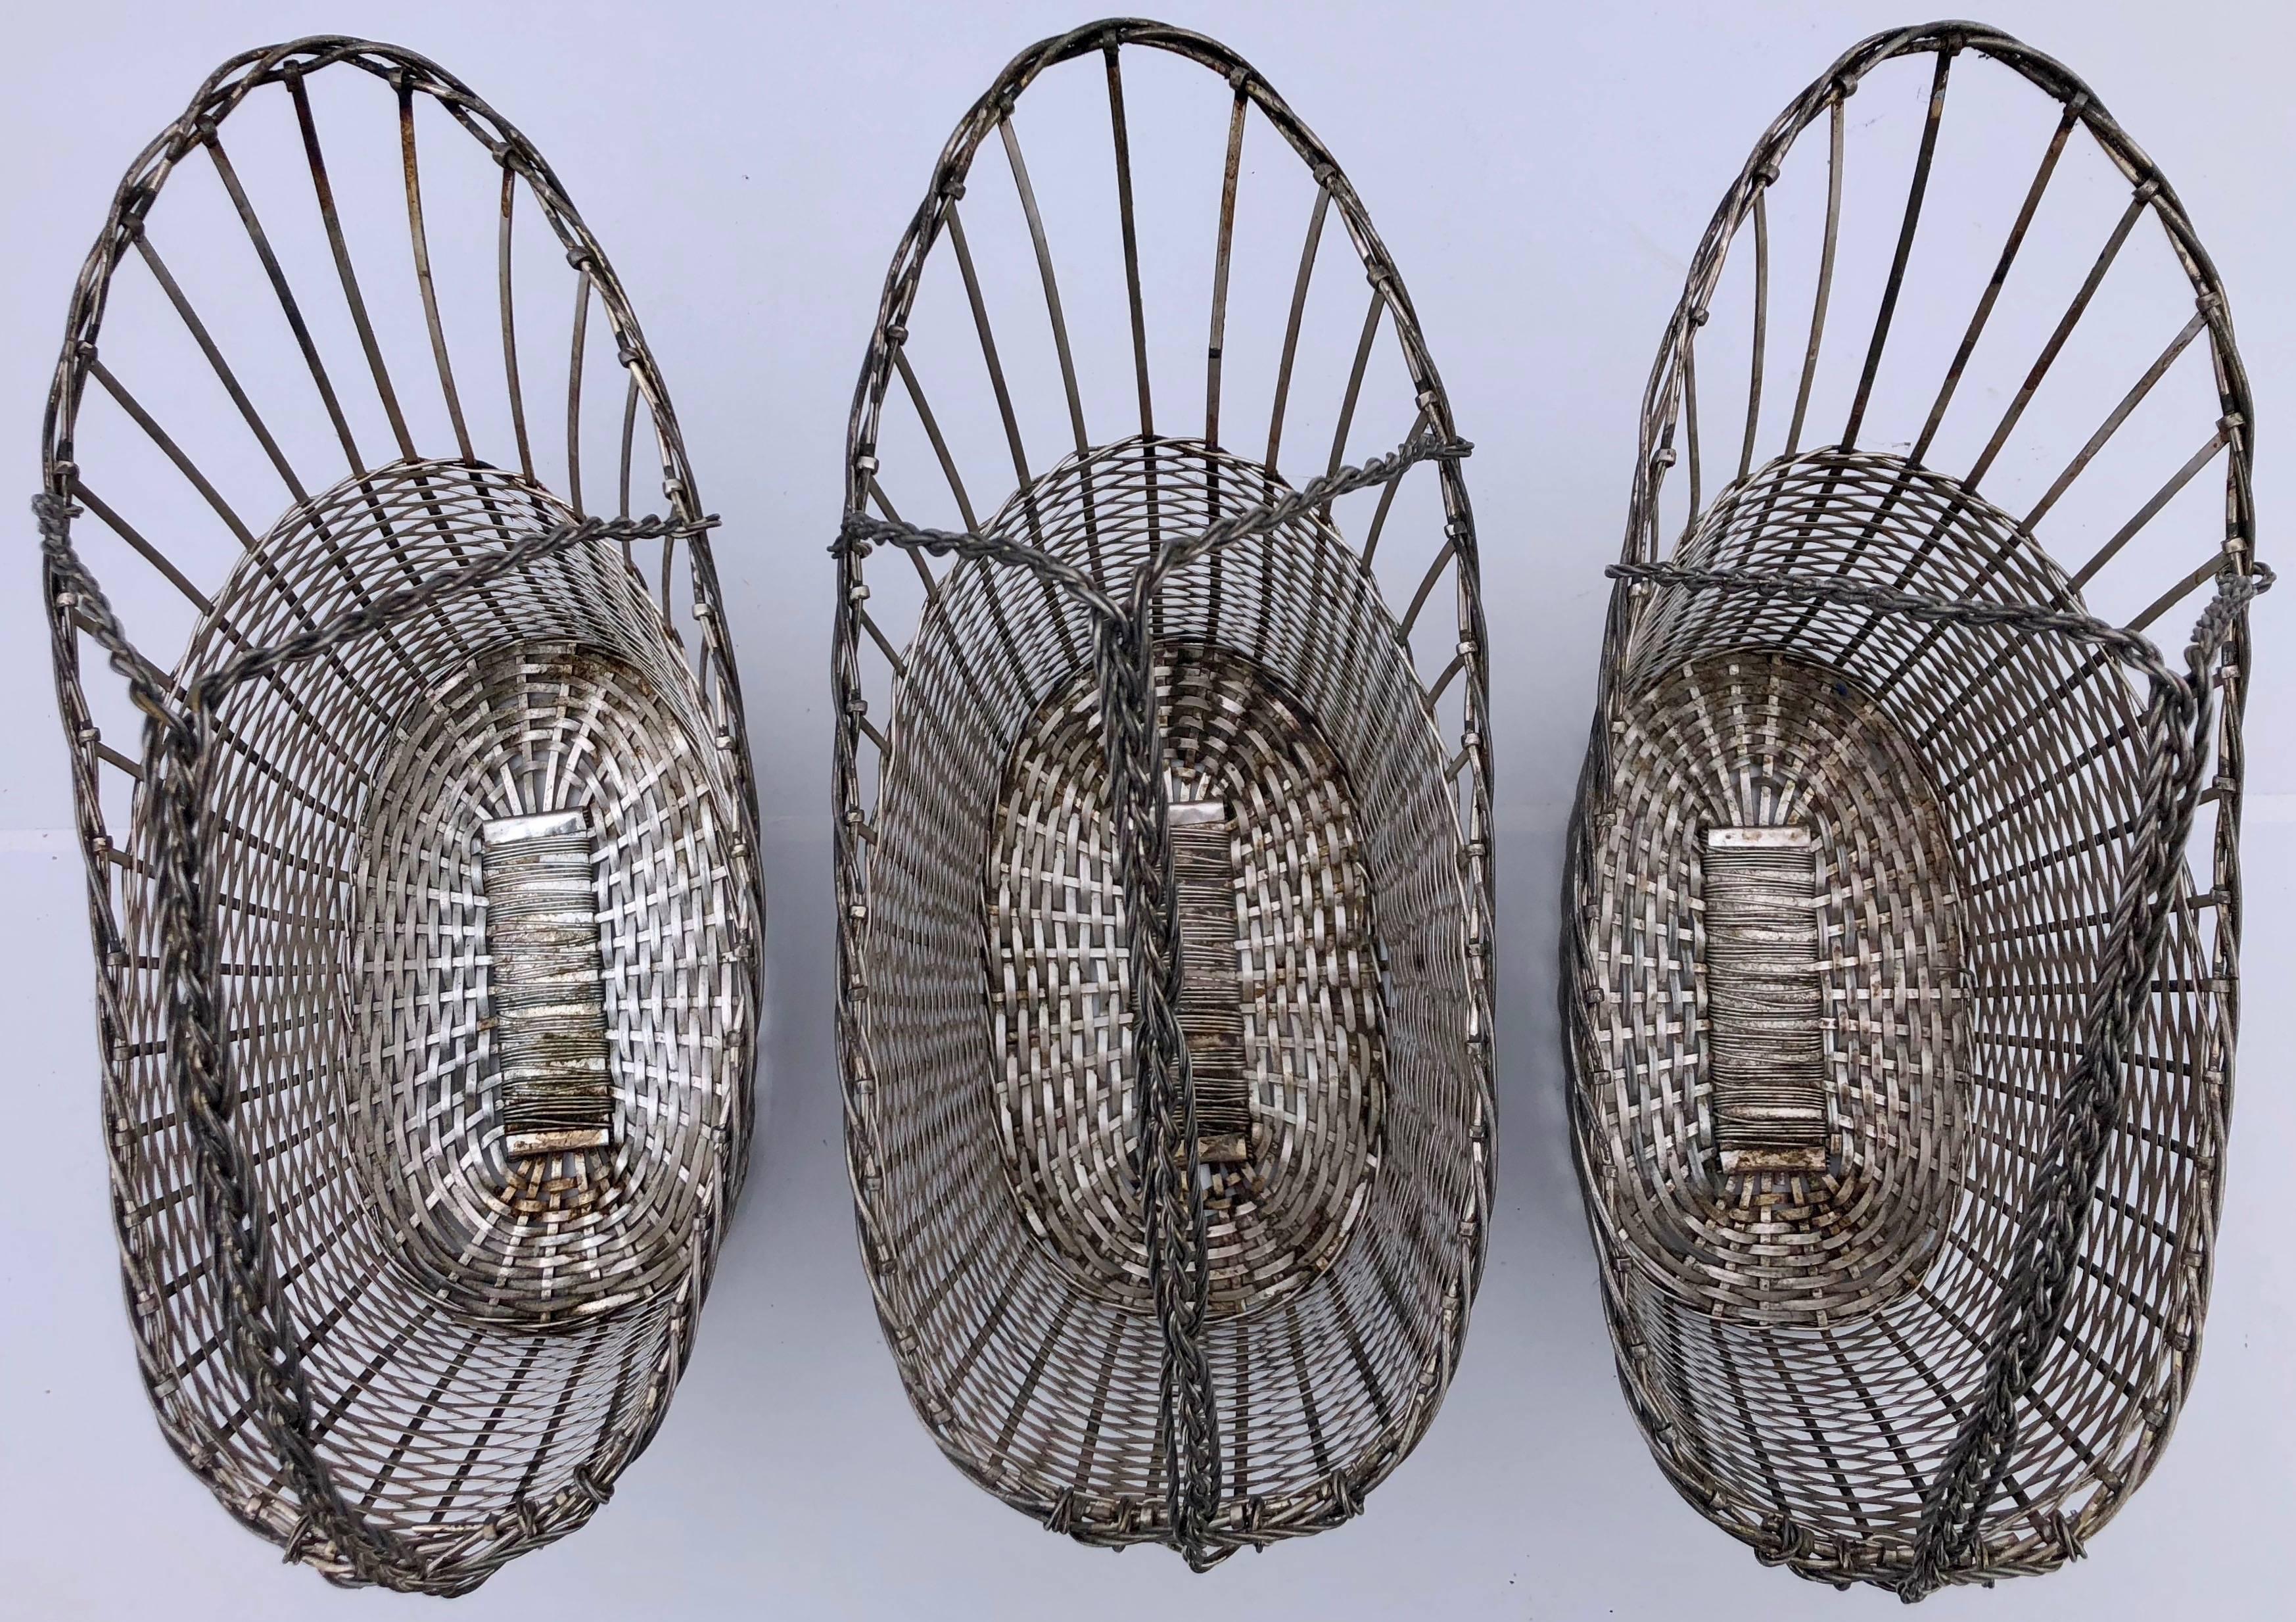 This set of three metal bottle baskets made of woven metal strips. They were used in a Parisian restaurant for decades and are very solid, yet very light, which is what one ideally needs when holding the basket in one hand to pour wine. A perfect